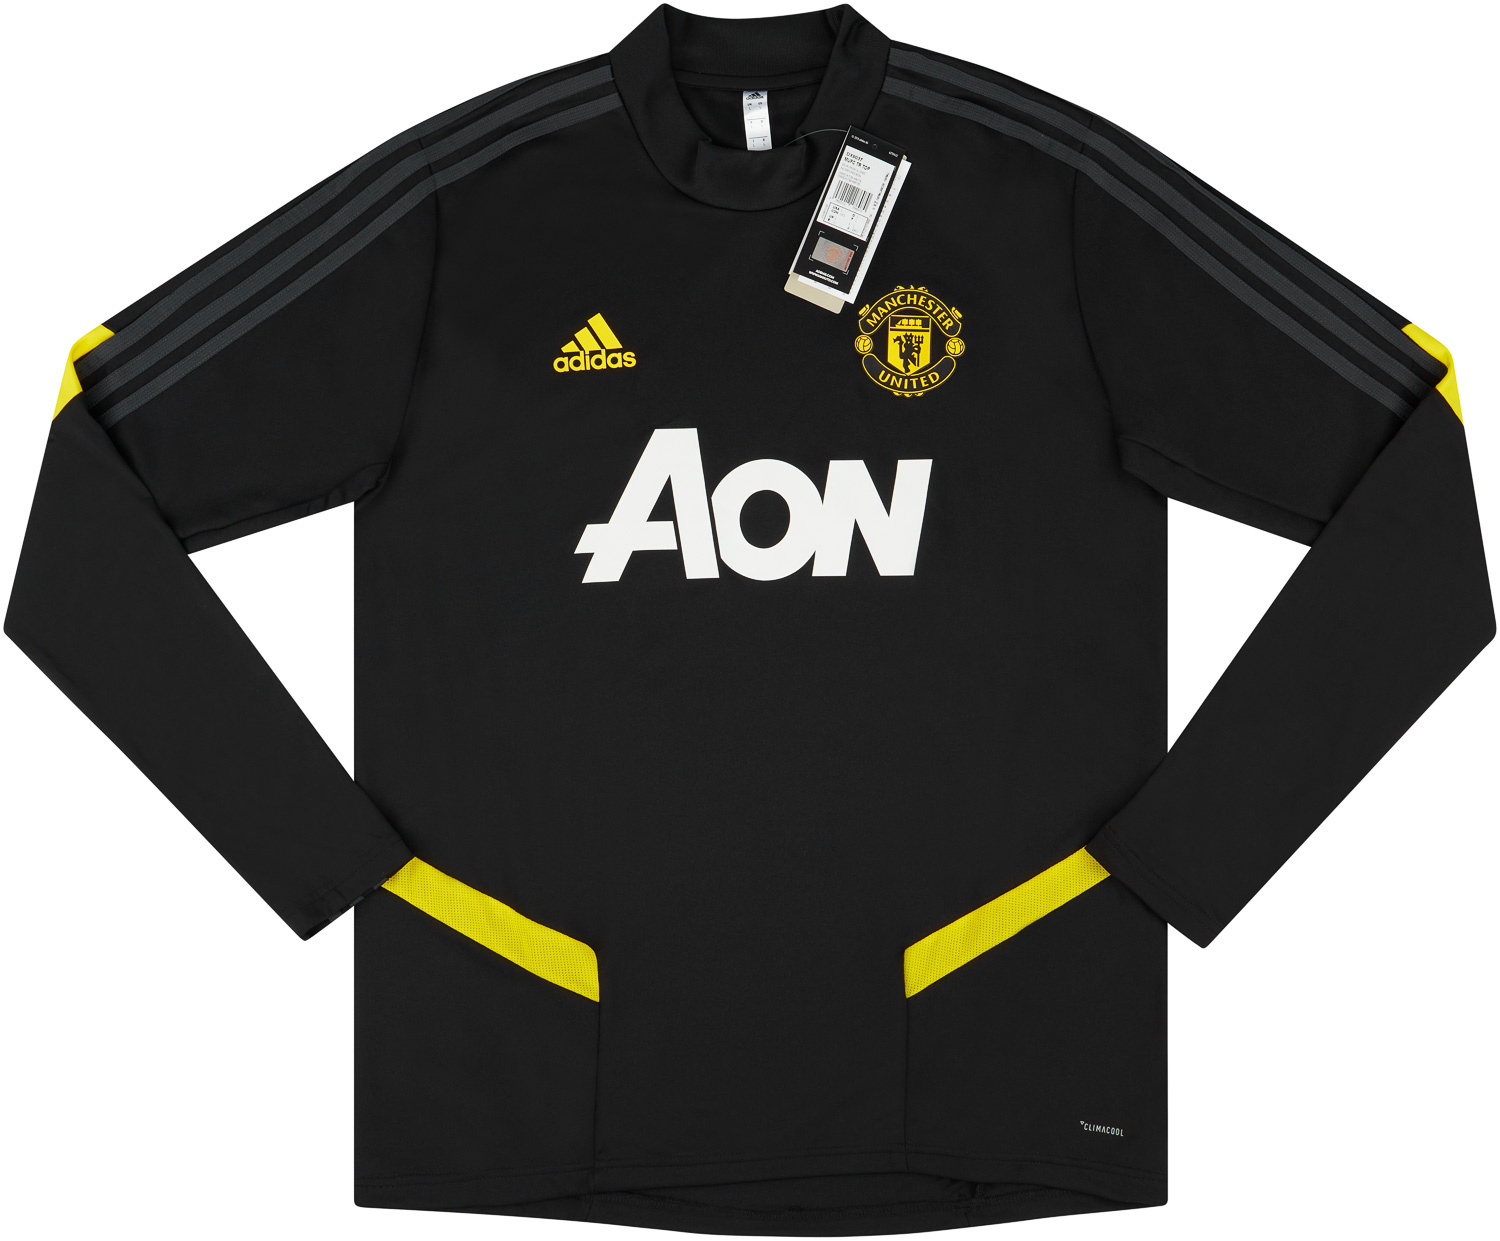 2019-20 Manchester United adidas Top - NEW -